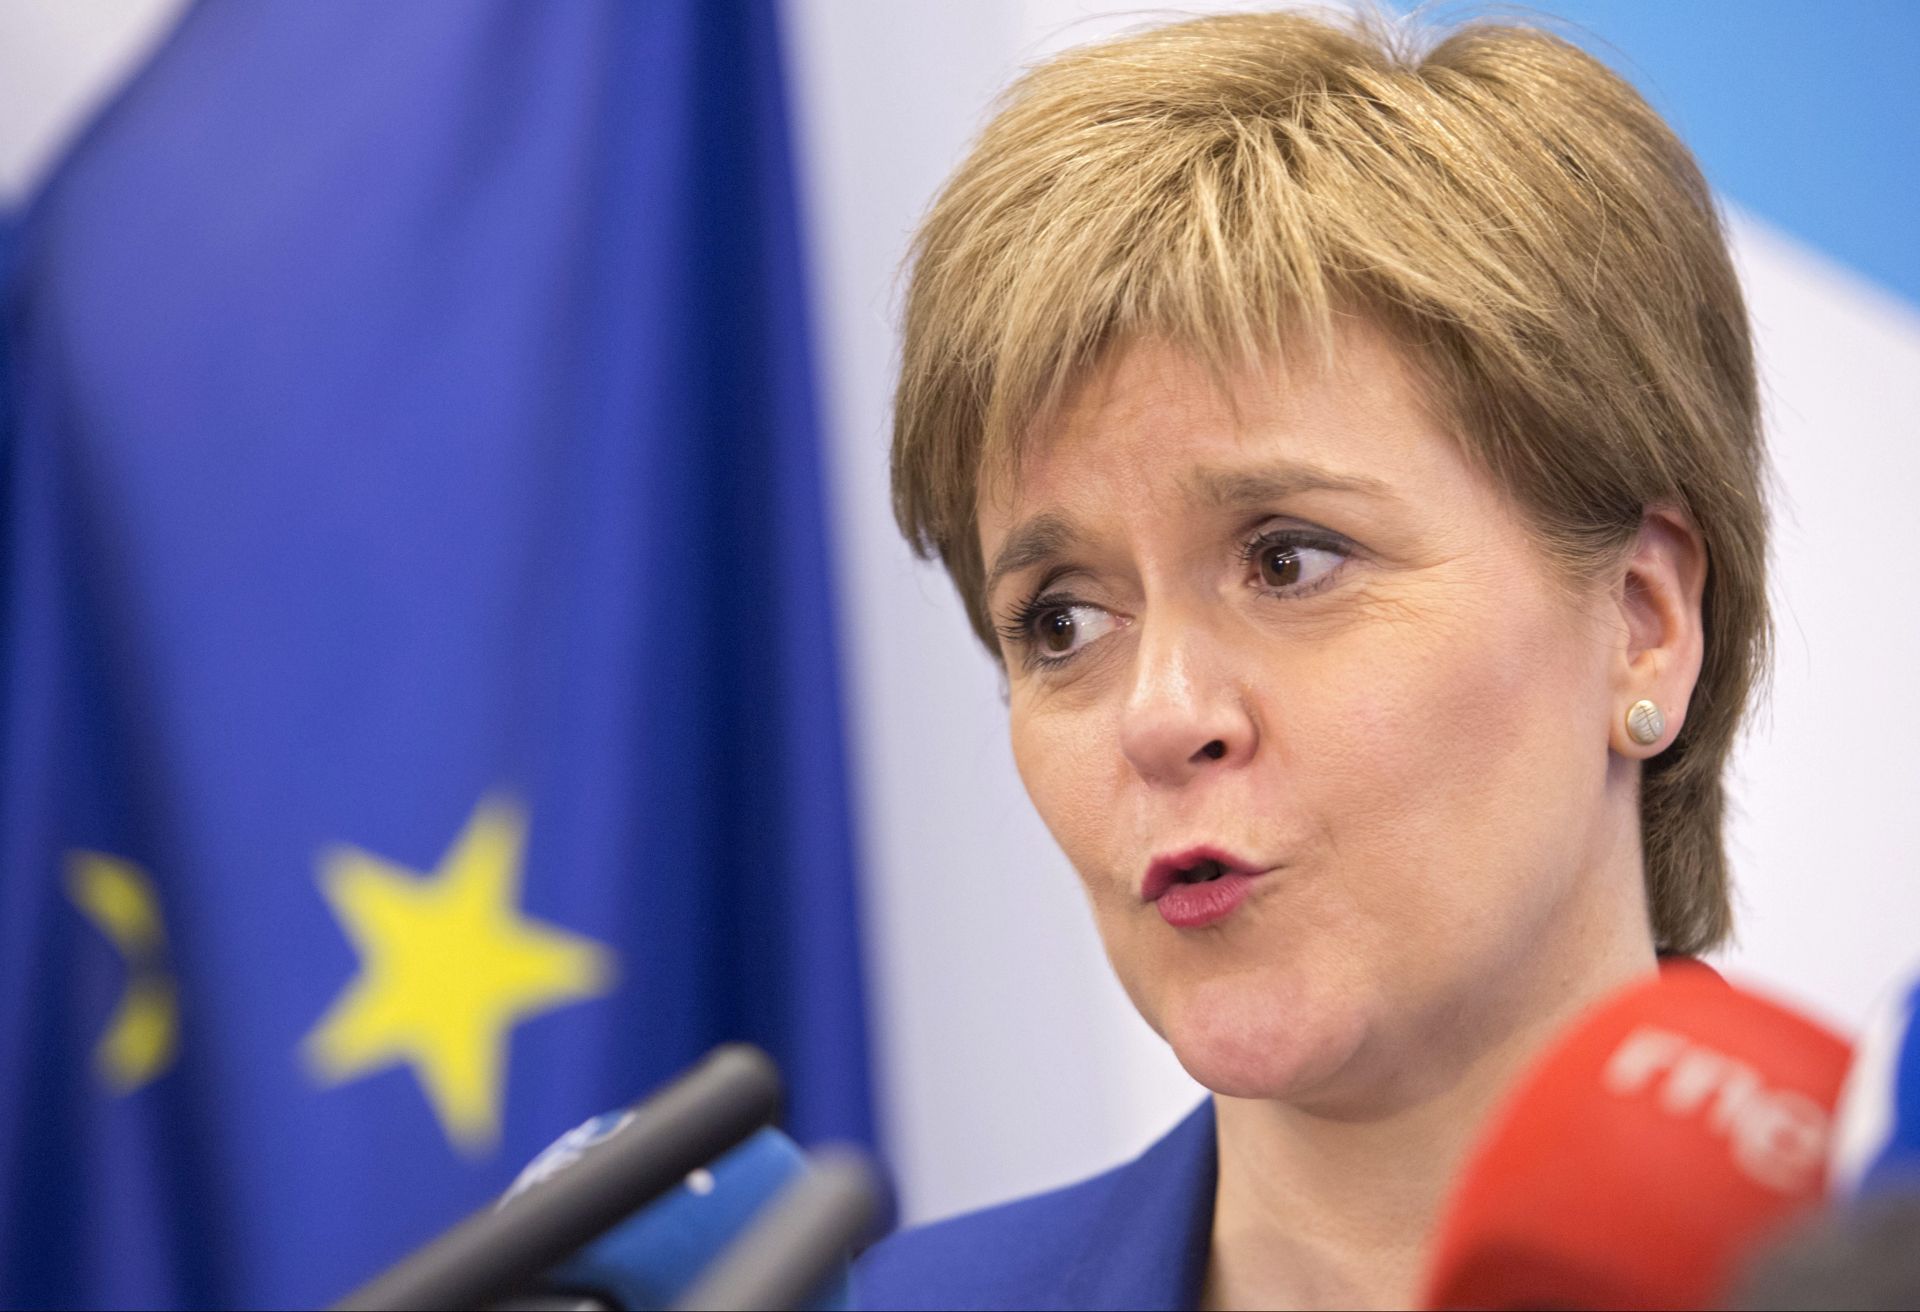 epa05397953 Scotland's First Minister Nicola Sturgeon holds a news conference at the Scotland House on her visit in Brussels, Belgium, 29 June 2016. Sturgeon met European Parliament leaders for talks on the future of Scotland's relation with the EU. A slim majority of people in Britain had in a referendum on 23 June voted to leave the European Union (EU).  EPA/GEOFFREY VAN DER HASSELT / POOL